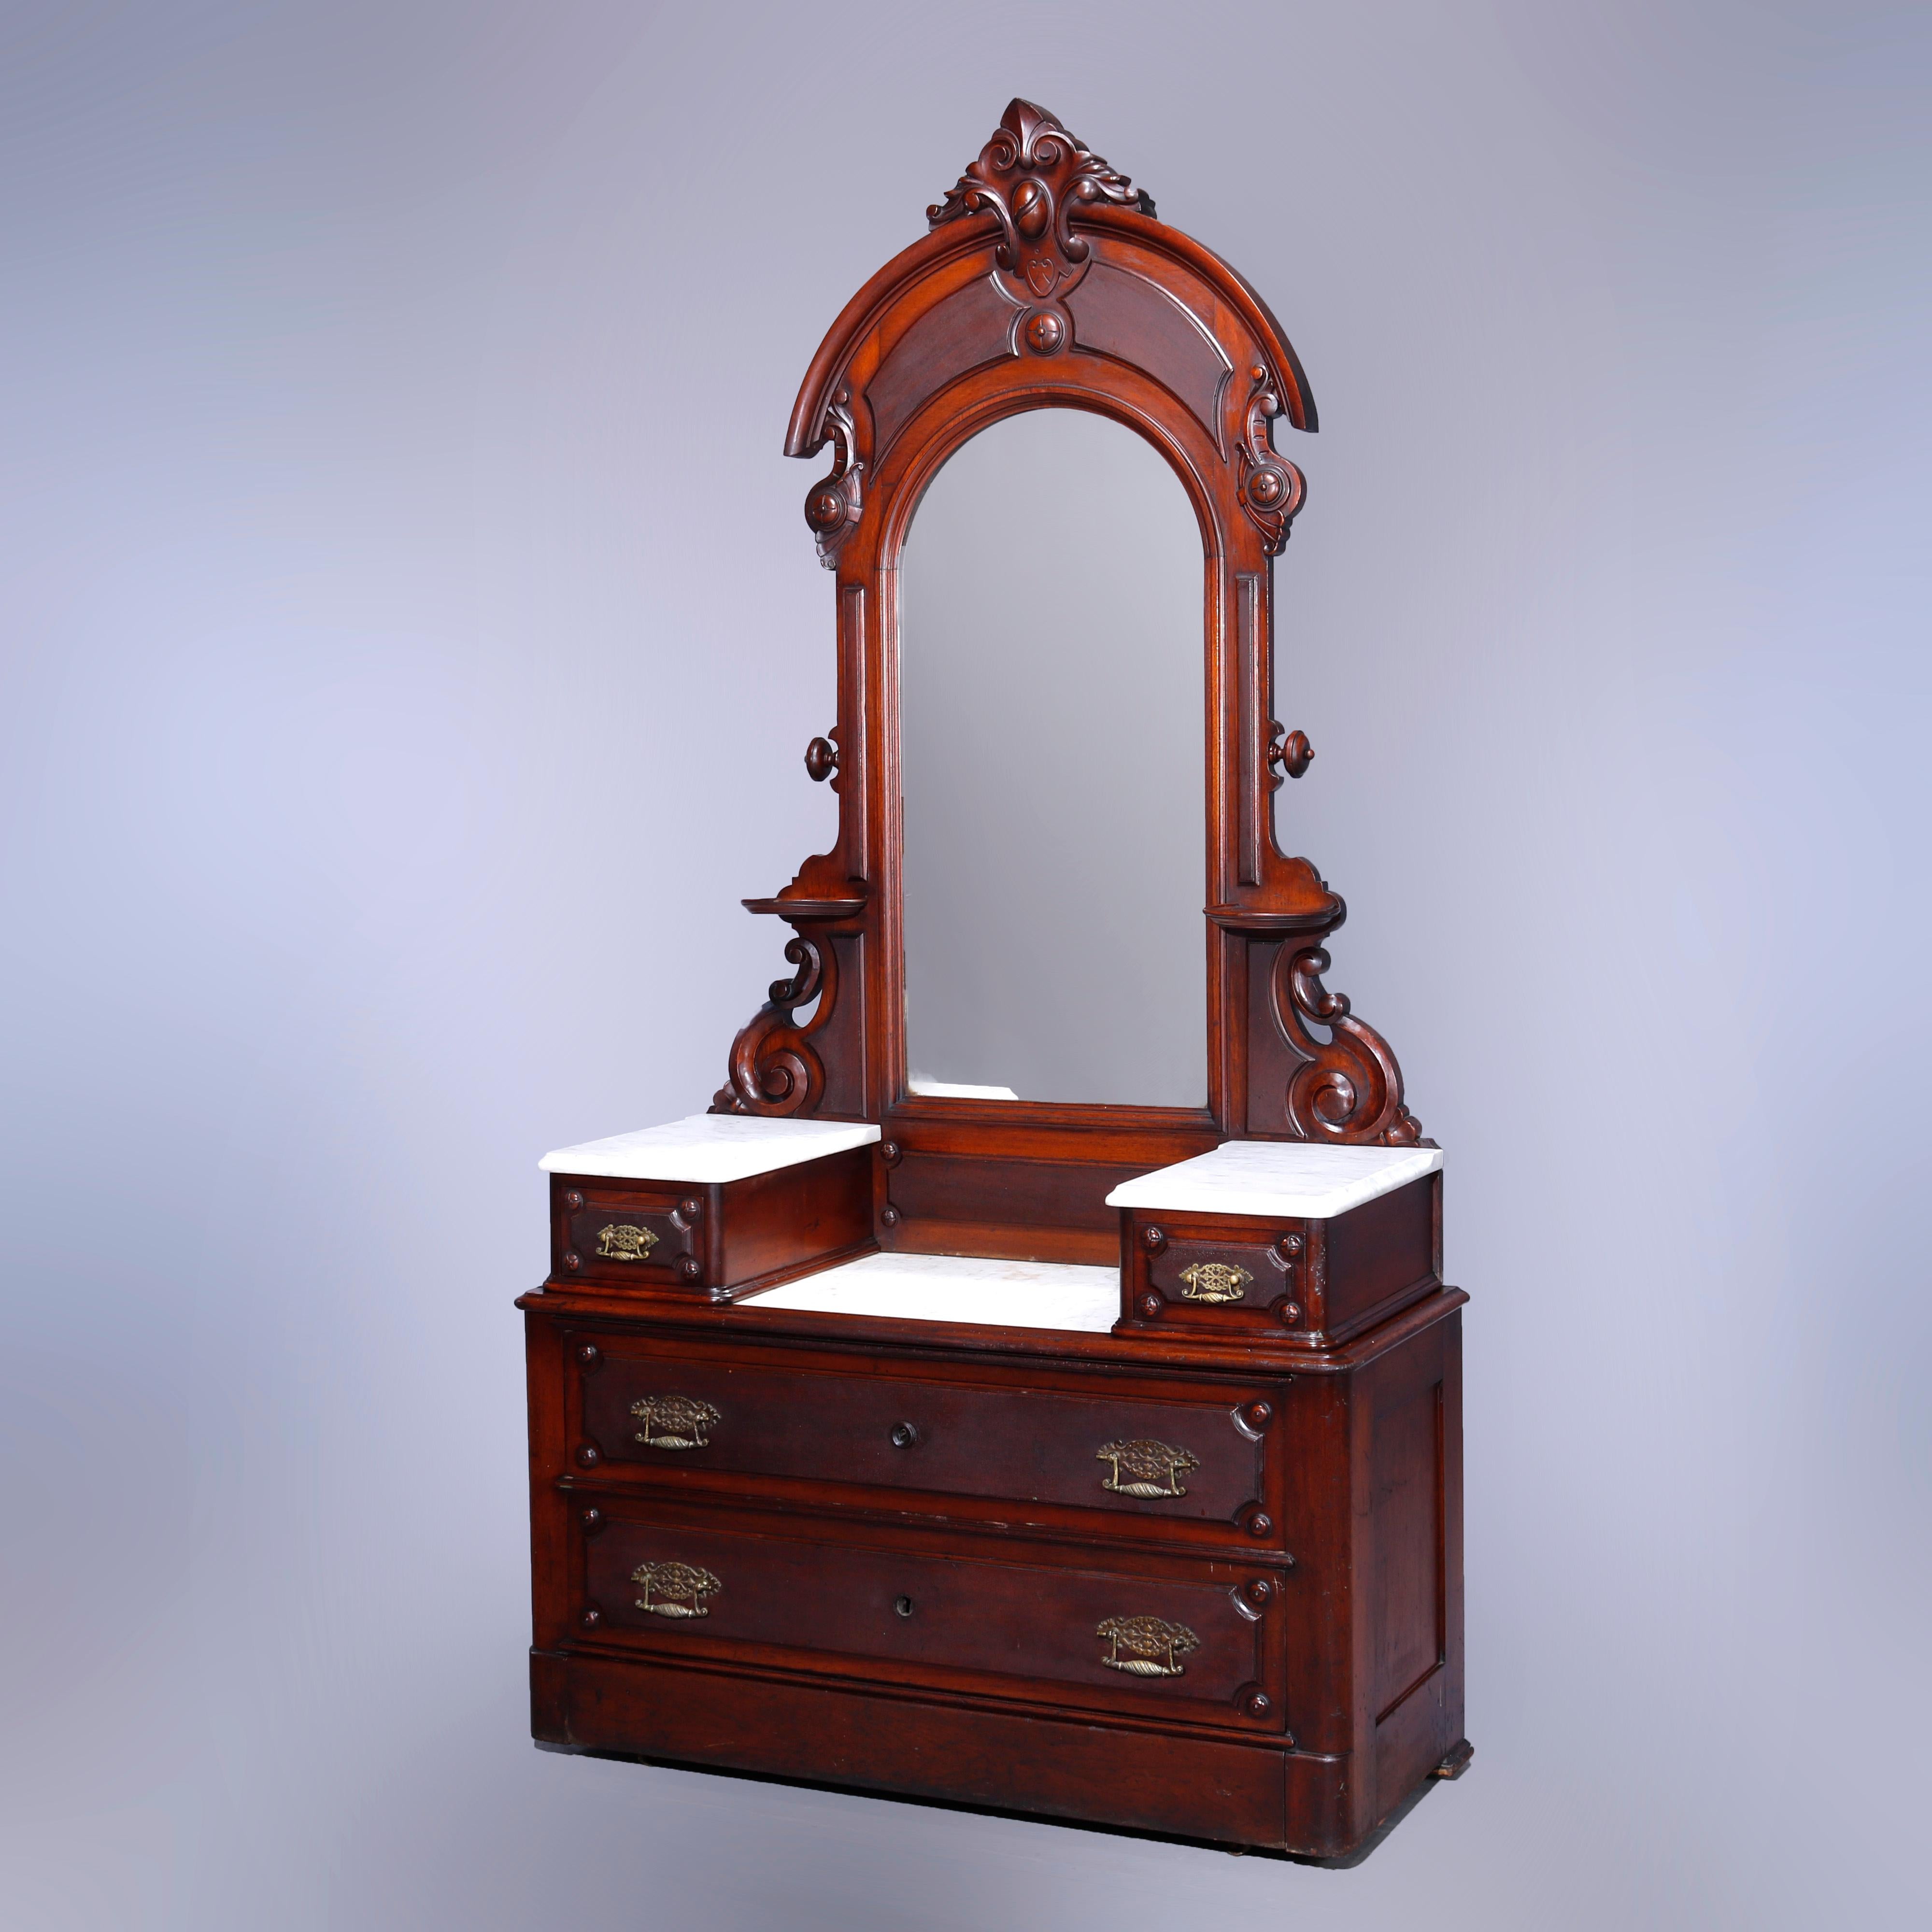 An antique Renaissance Revival dresser offers walnut construction with dressing mirror having carved foliate cartouche over frame with candle stands and flanking scroll corbels surmounting drop-center case having marble top, flanking glove boxes and